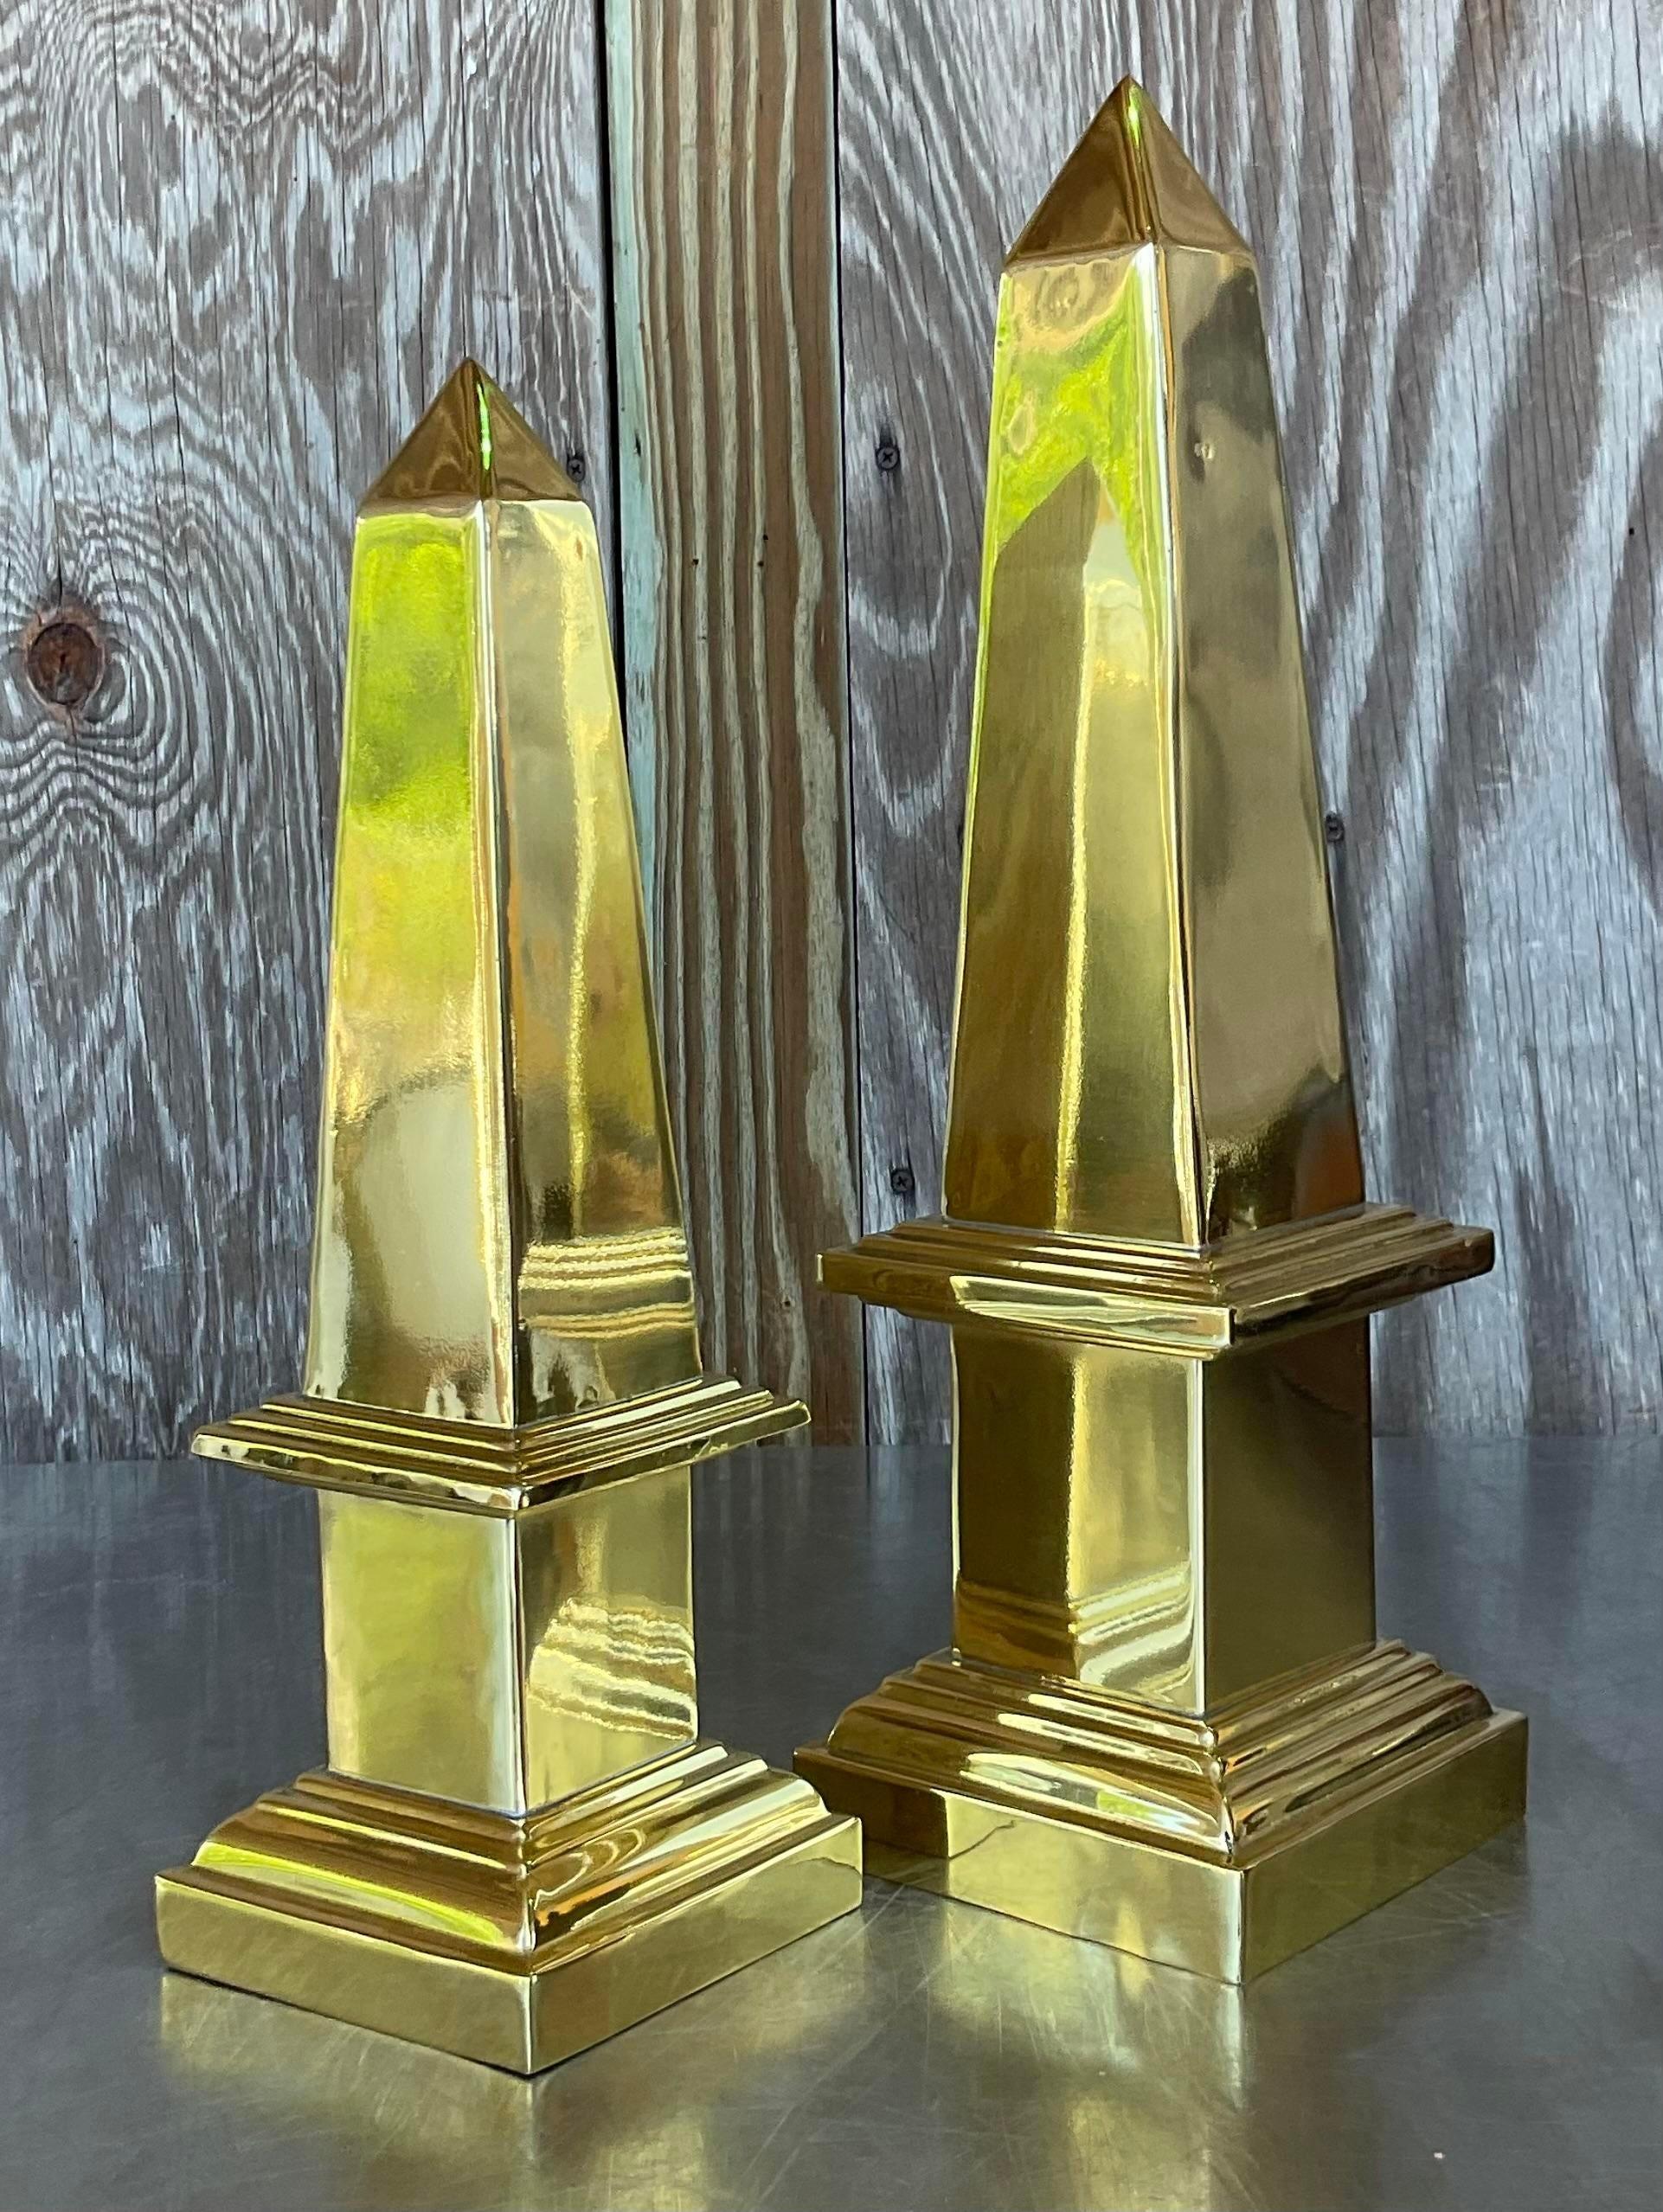 Timelessly elegant, this pair of Vintage Regency Brass Obelisks adds a touch of American sophistication to any space, blending classic design with enduring charm.

Second obelisk 4.5x4.5x14.5